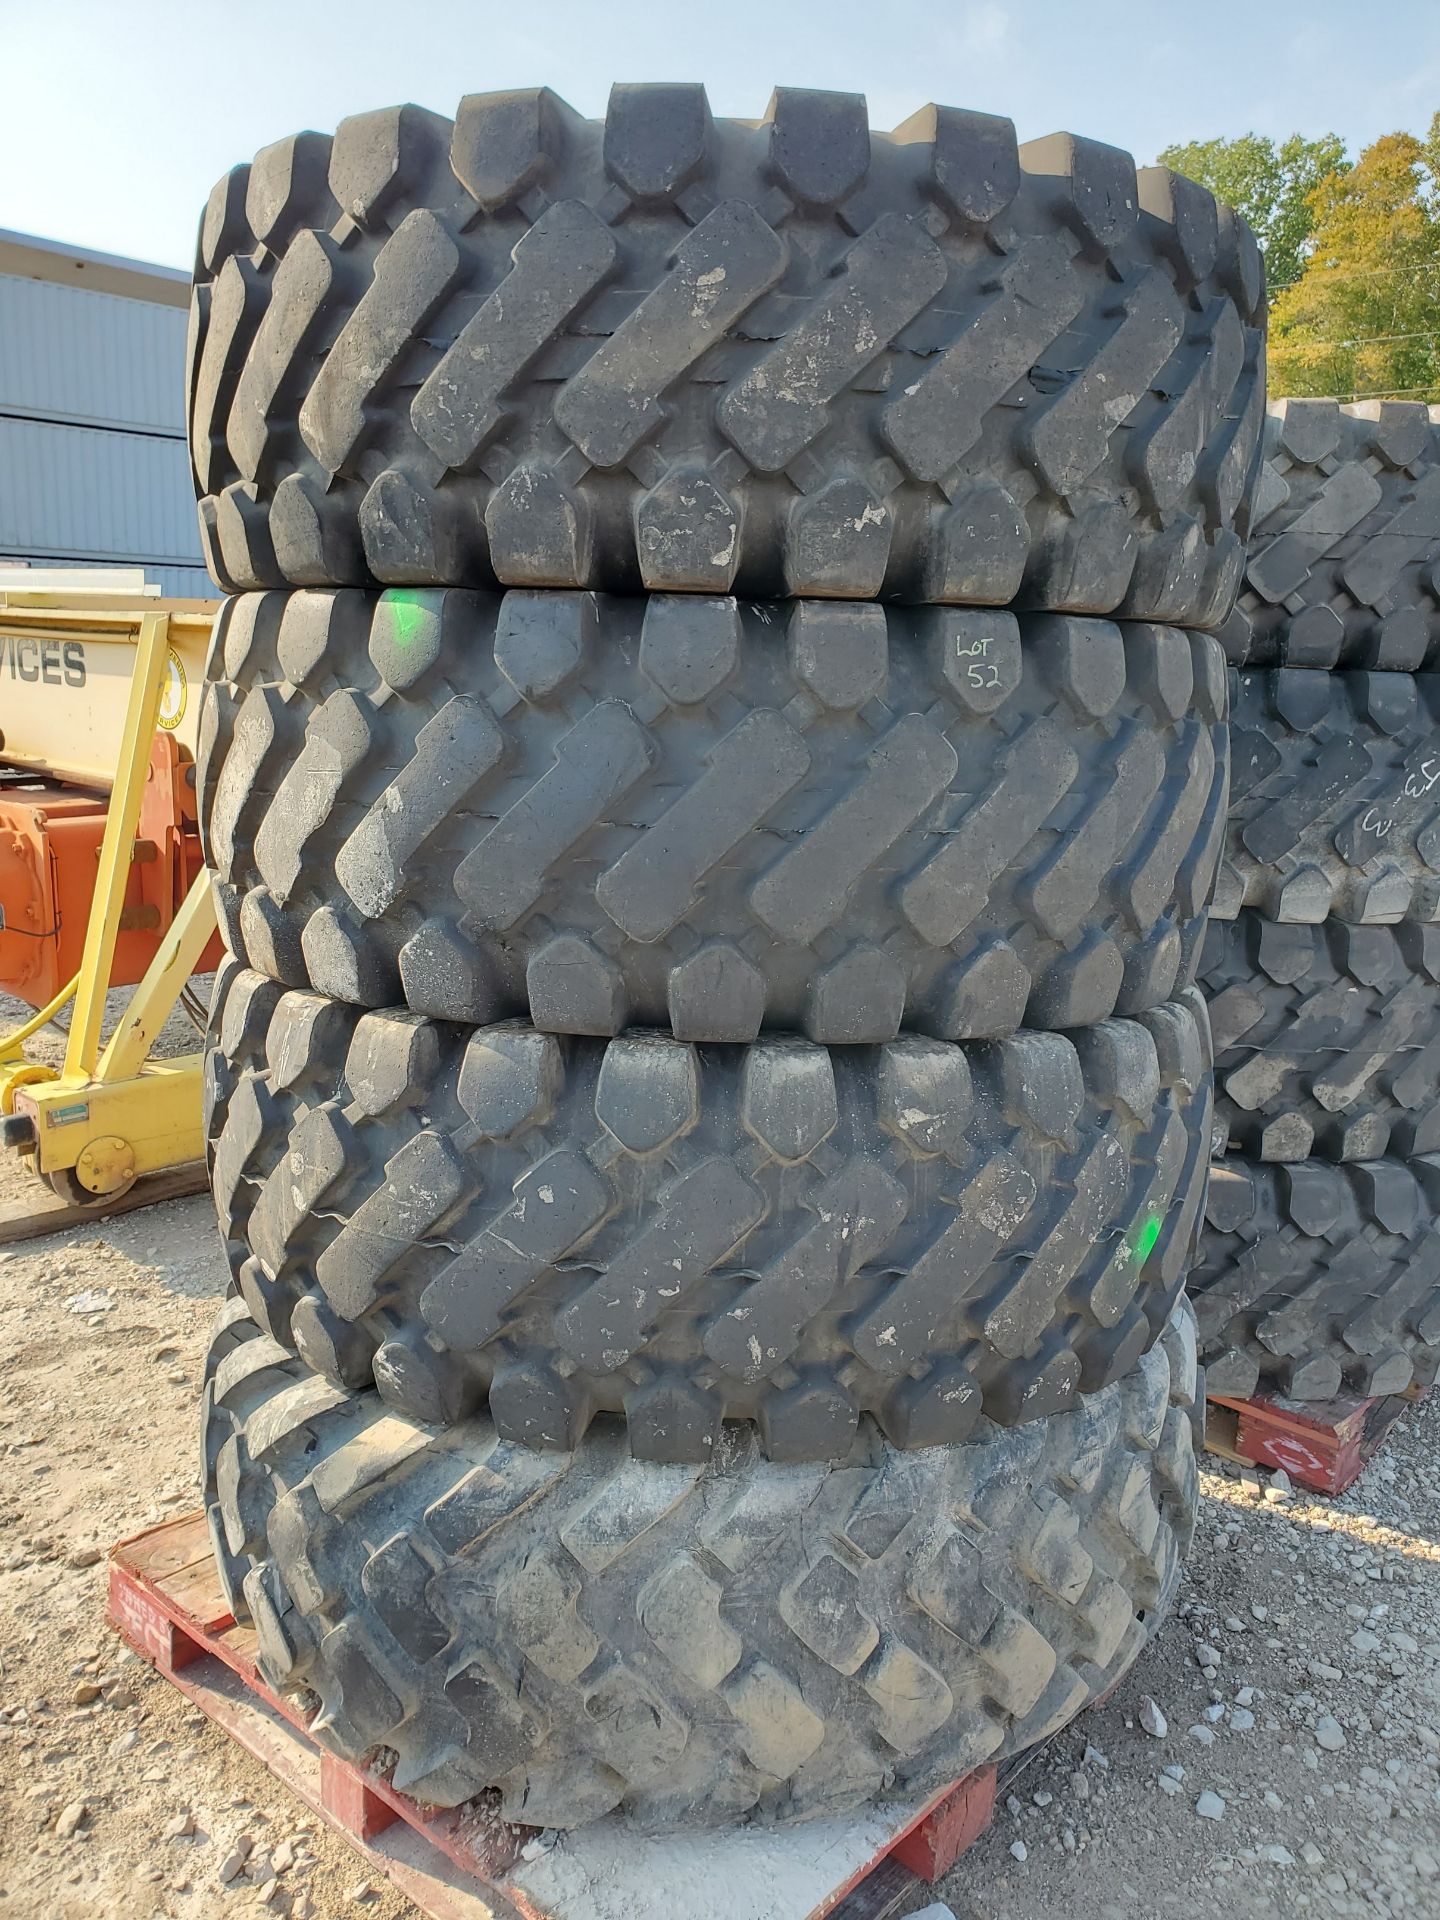 (4) PERFORMAX 20.5-25 FRONT END LOADER TIRES (GOOD CONDITION, USED) - Image 5 of 7